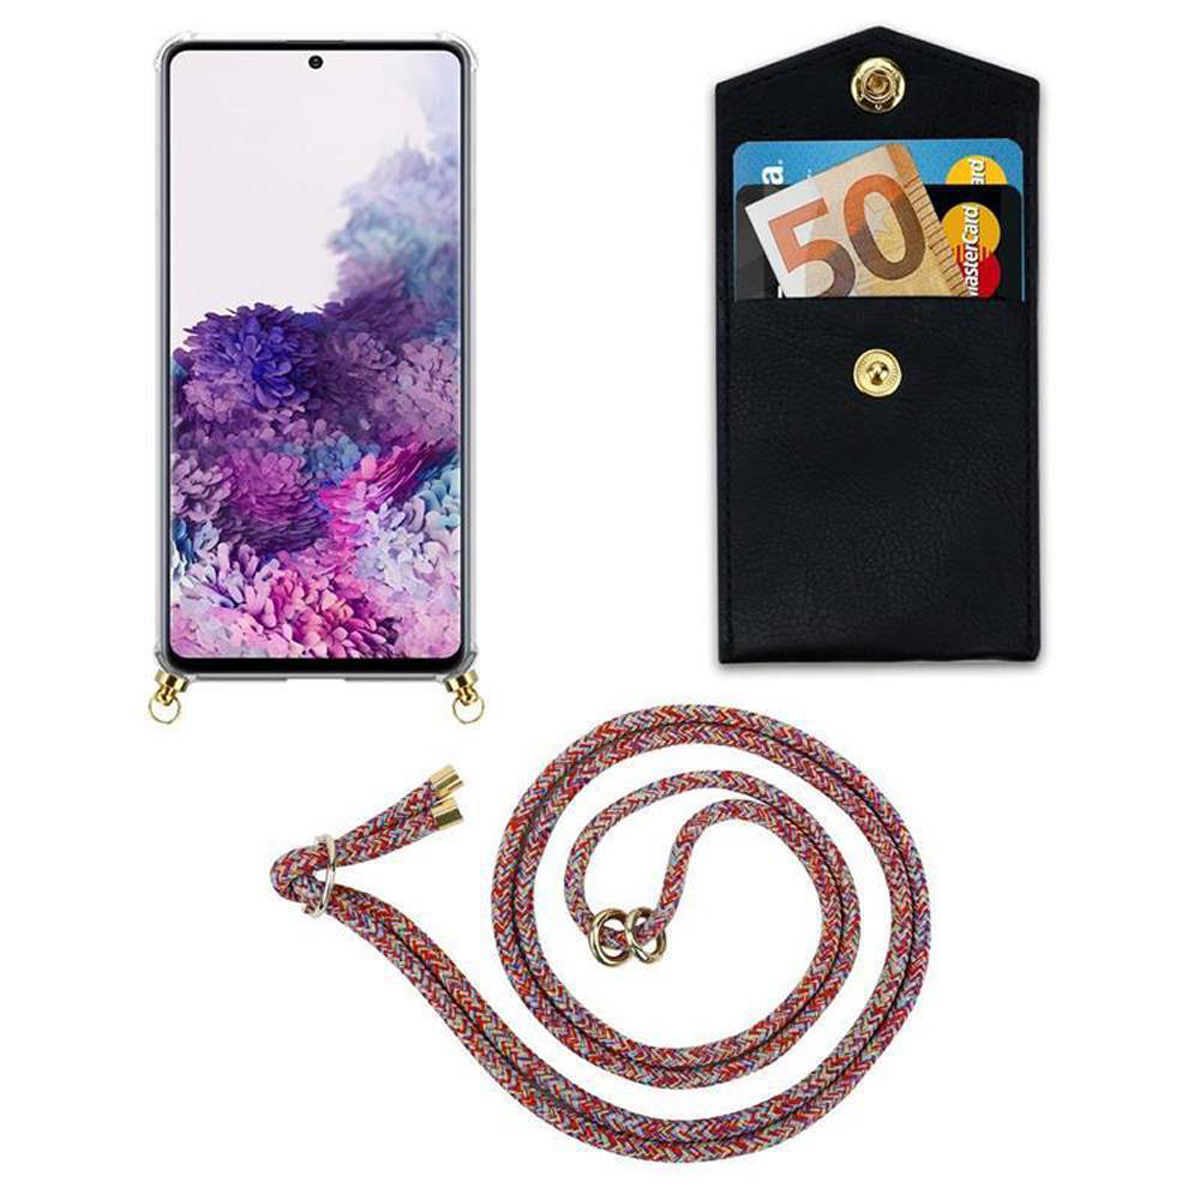 Hülle, abnehmbarer A51 Samsung, Ringen, Band CADORABO mit Kette PARROT Handy 4G Gold M40s, Galaxy Backcover, und / COLORFUL Kordel